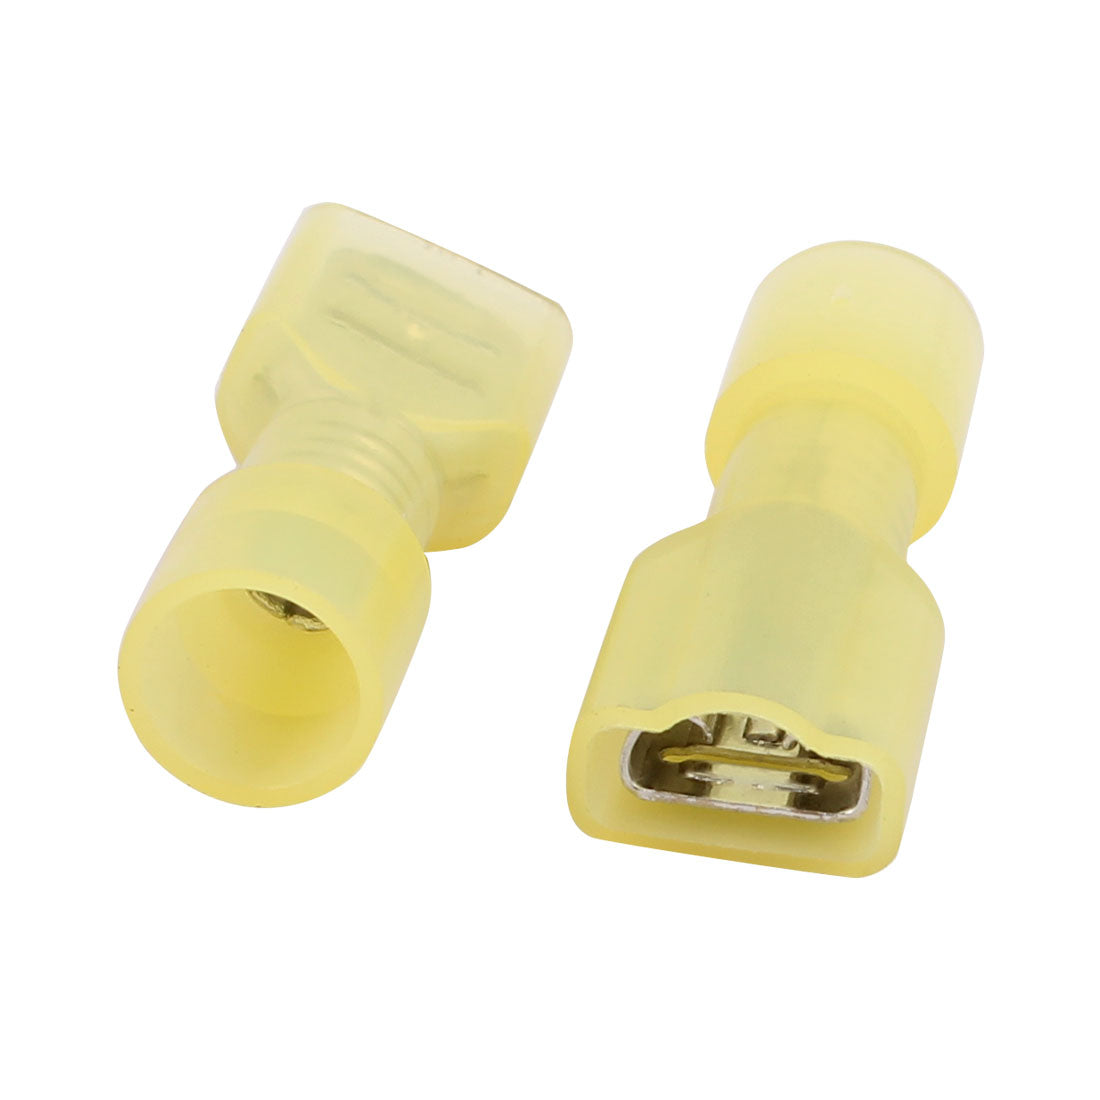 uxcell Uxcell 30pcs 12-10AWG Wire Insulated 6.3mm Female Spade Crimp Terminal Connector Yellow